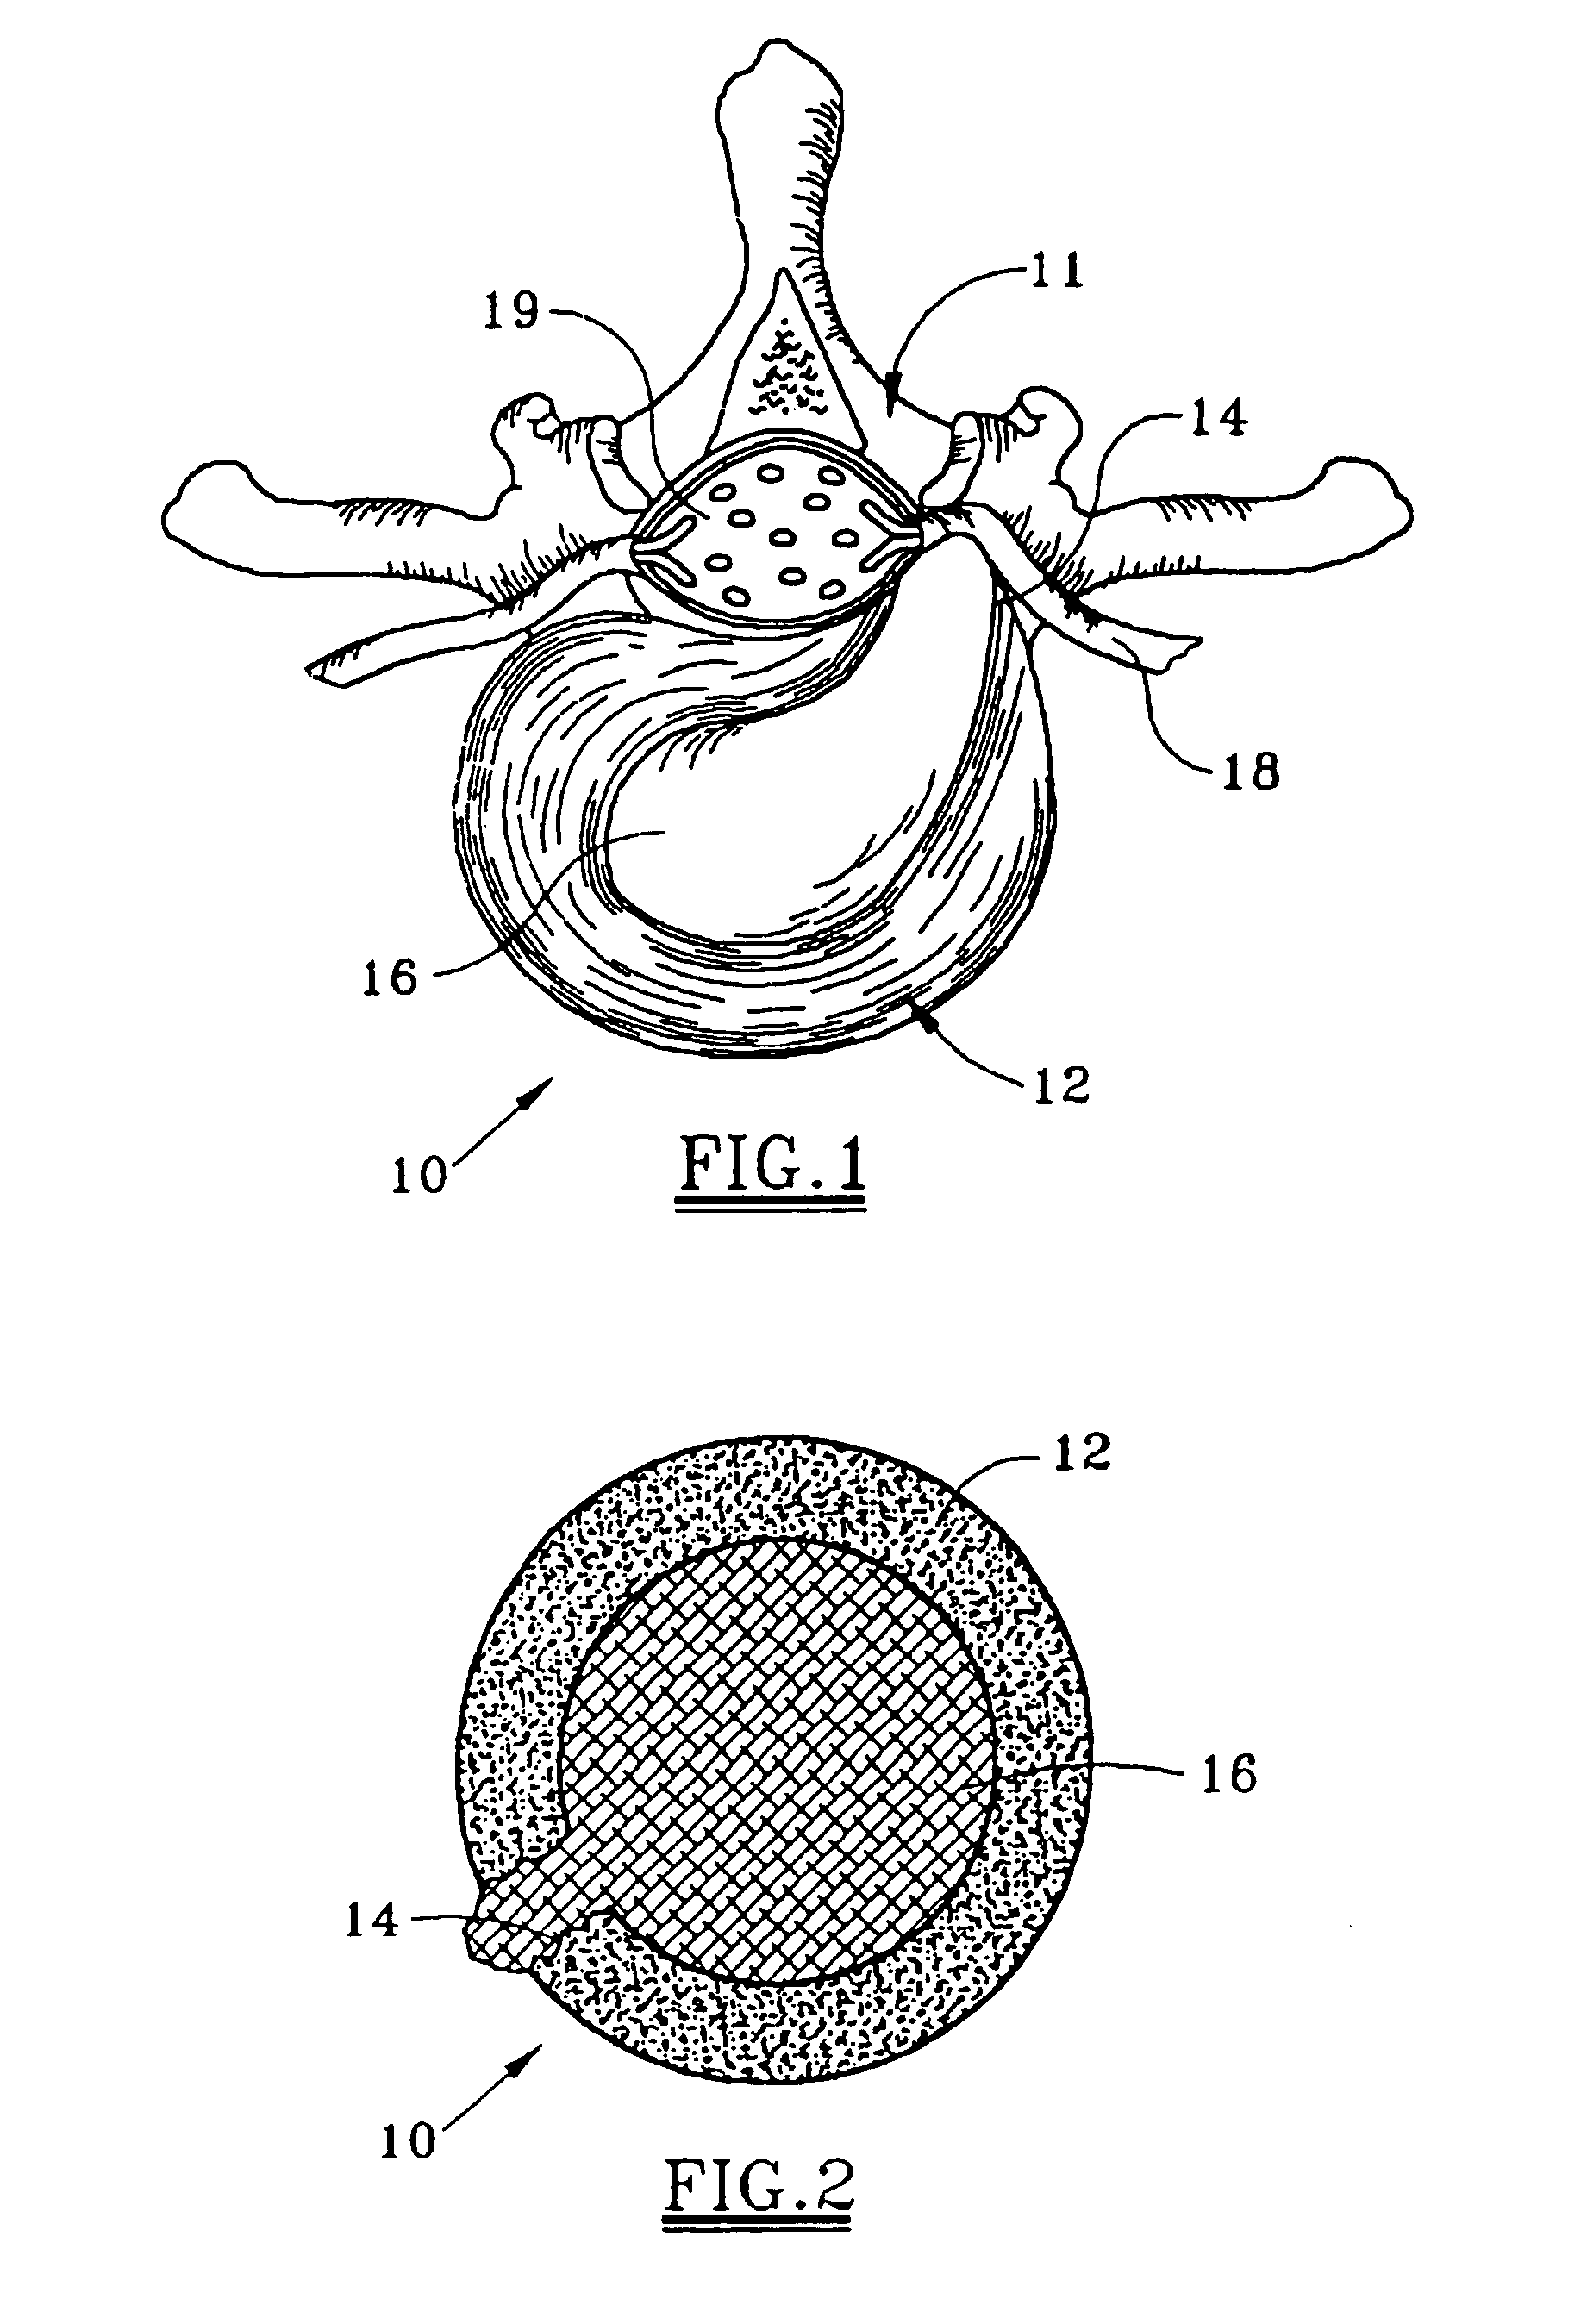 Method and apparatus for treating intervertebral disks